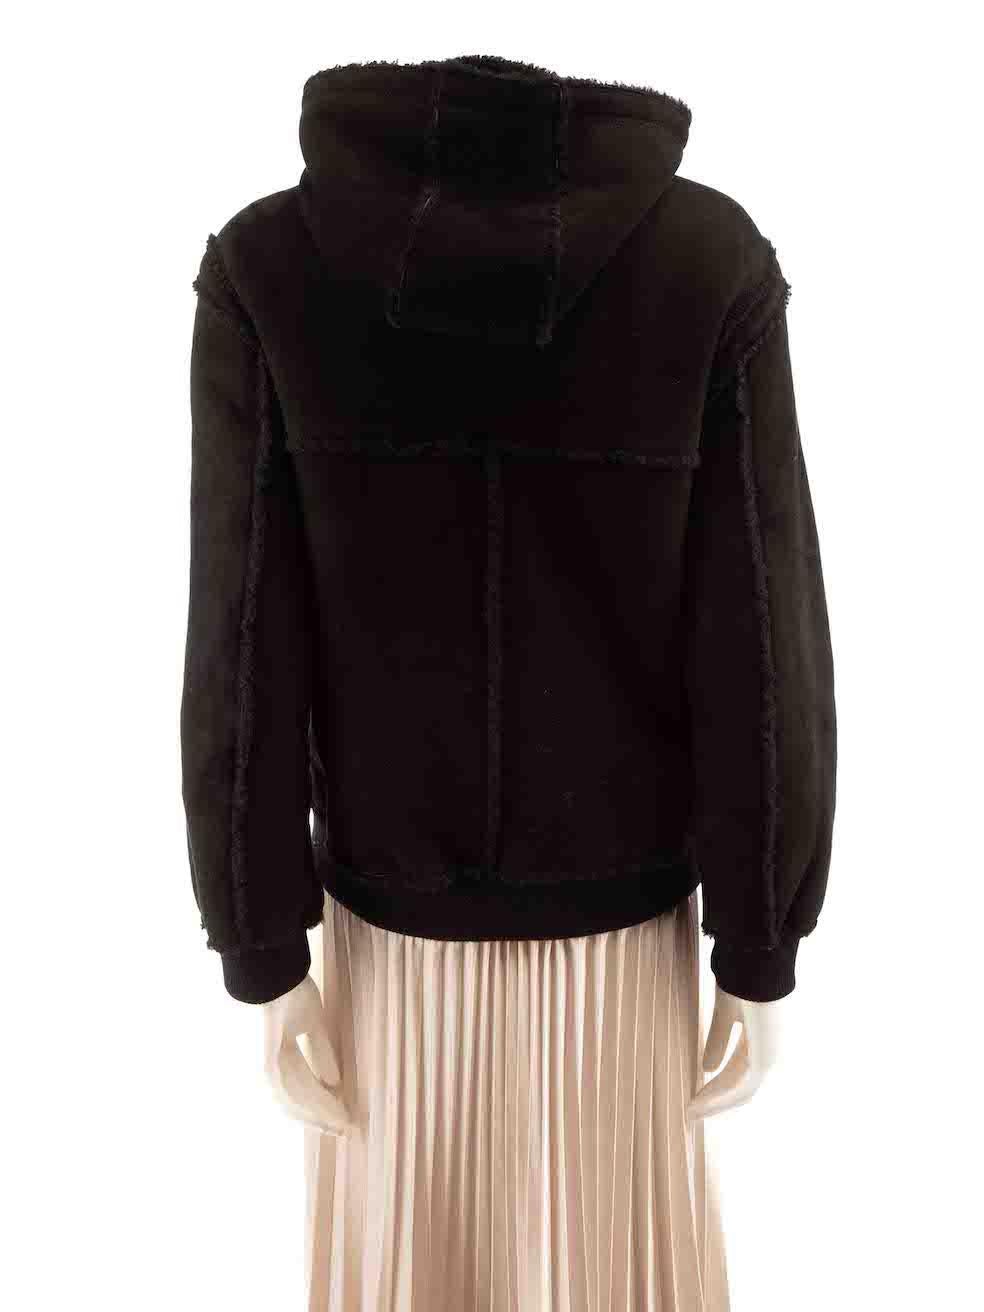 Proenza Schouler Black Lamb Suede Hooded Jacket Size S In Good Condition For Sale In London, GB